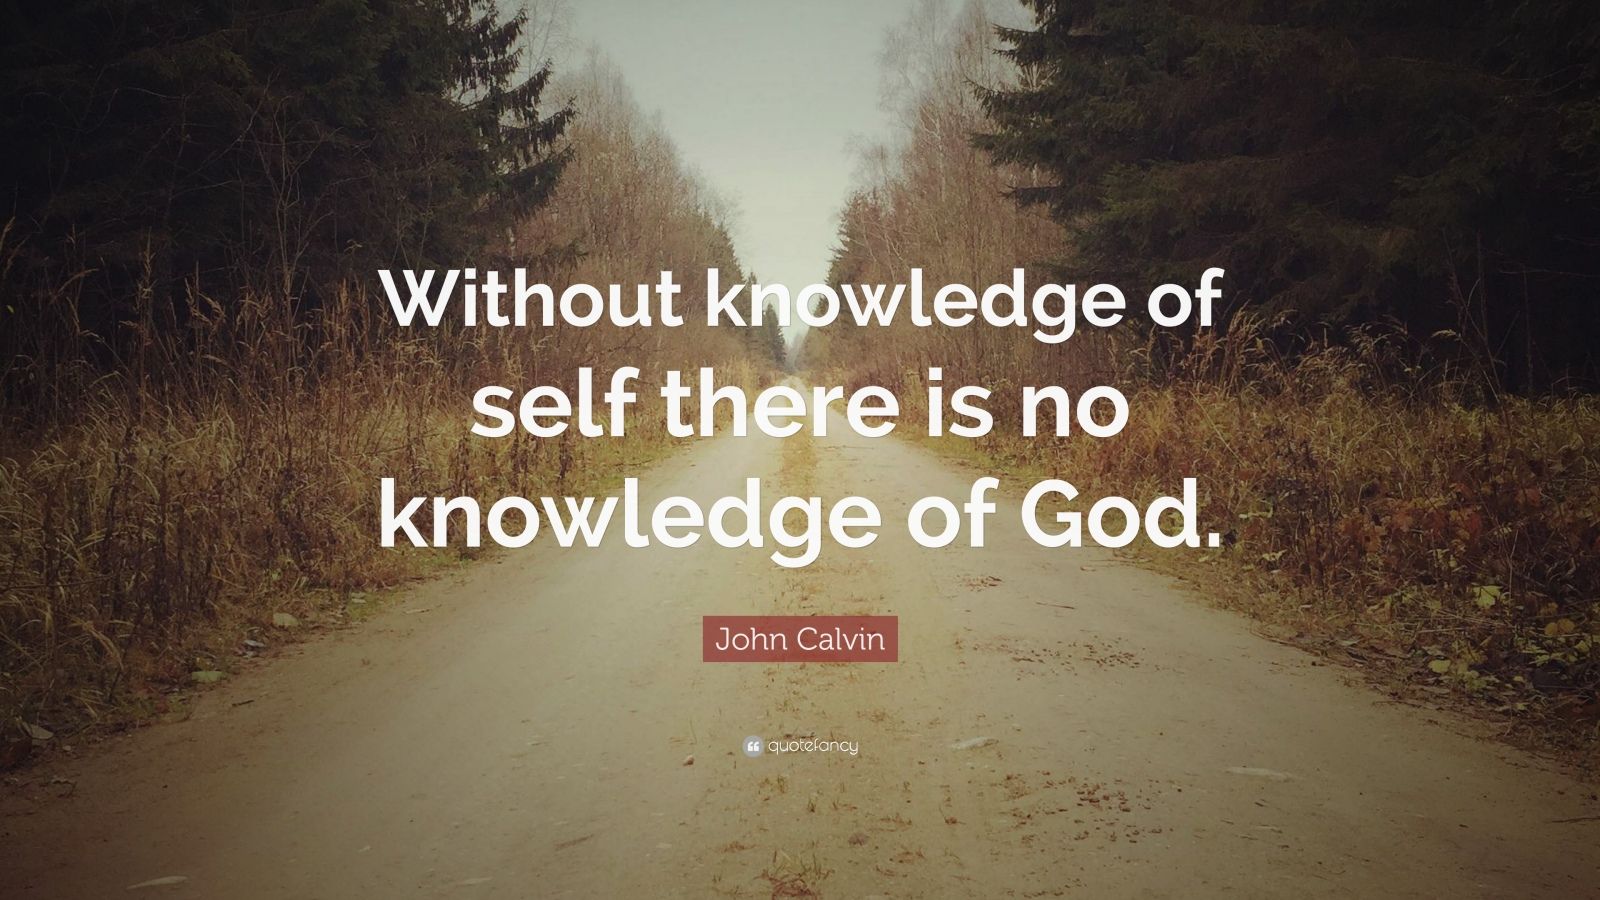 John Calvin Quote: “Without knowledge of self there is no knowledge of